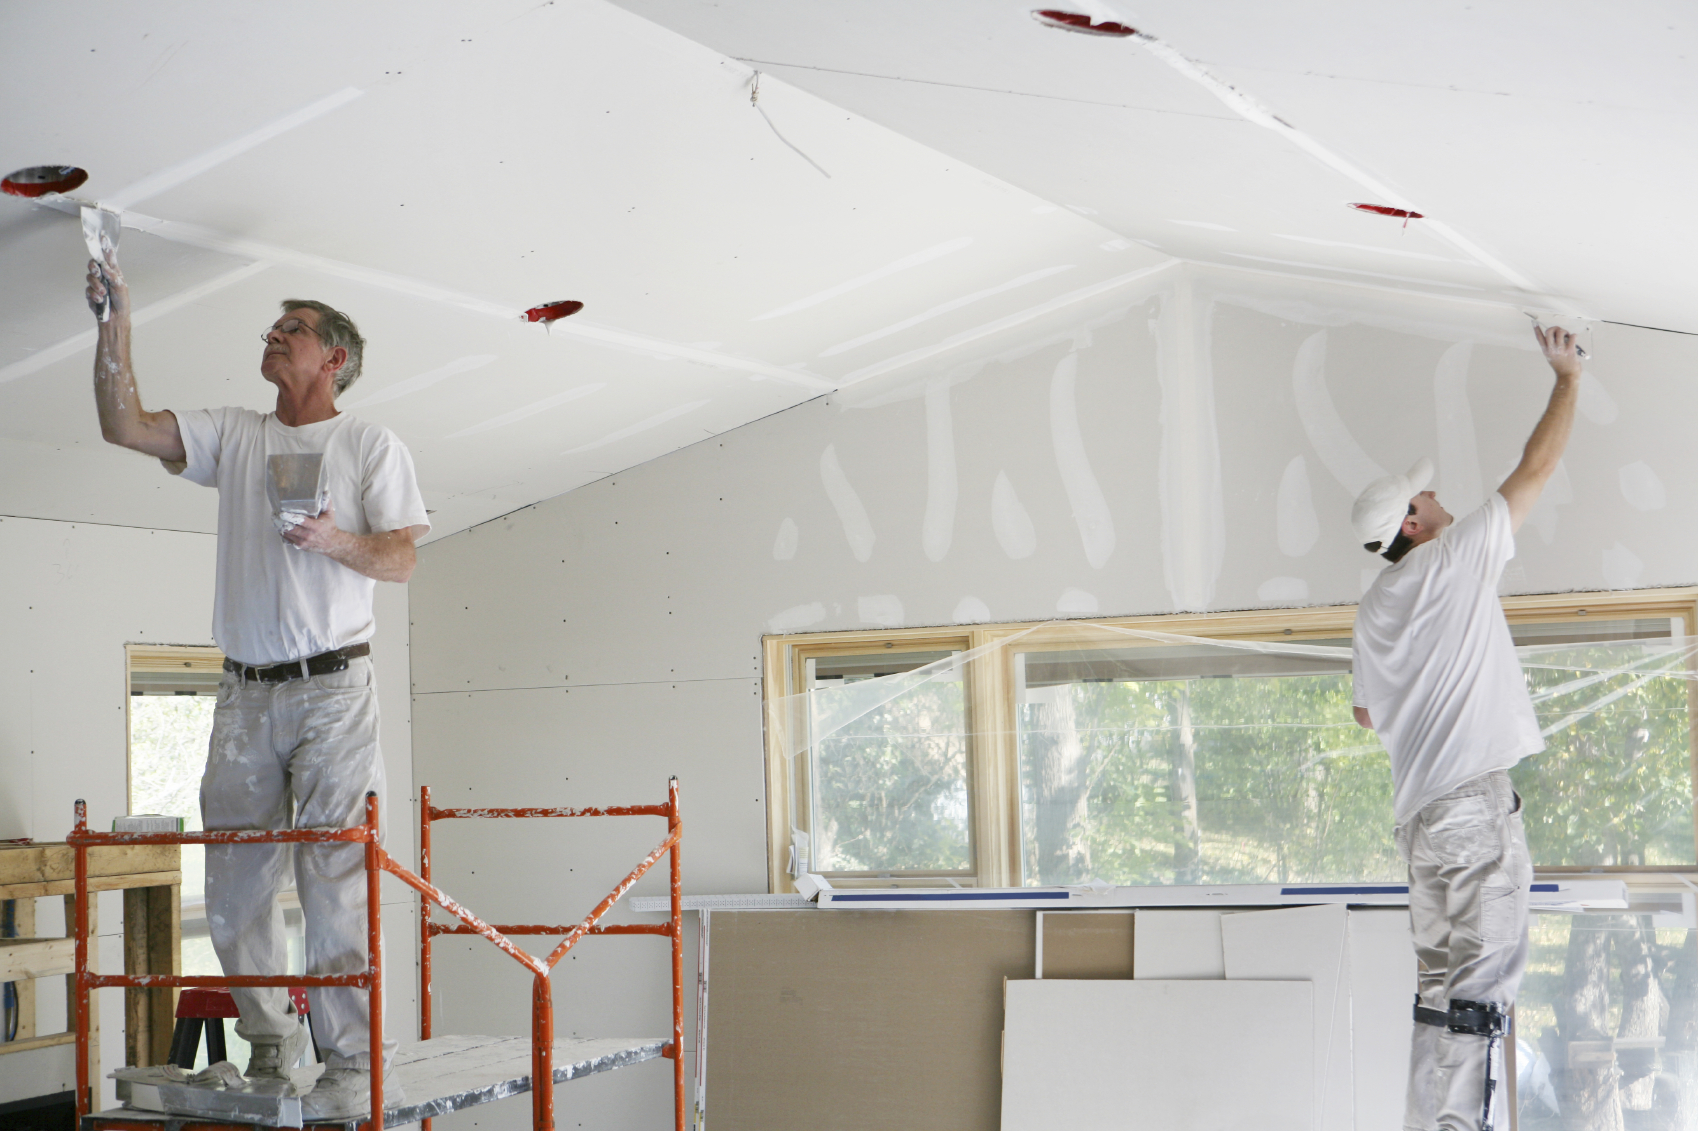 Drywall Install/Repair Contractors Near Me - 2021 Price Quotes